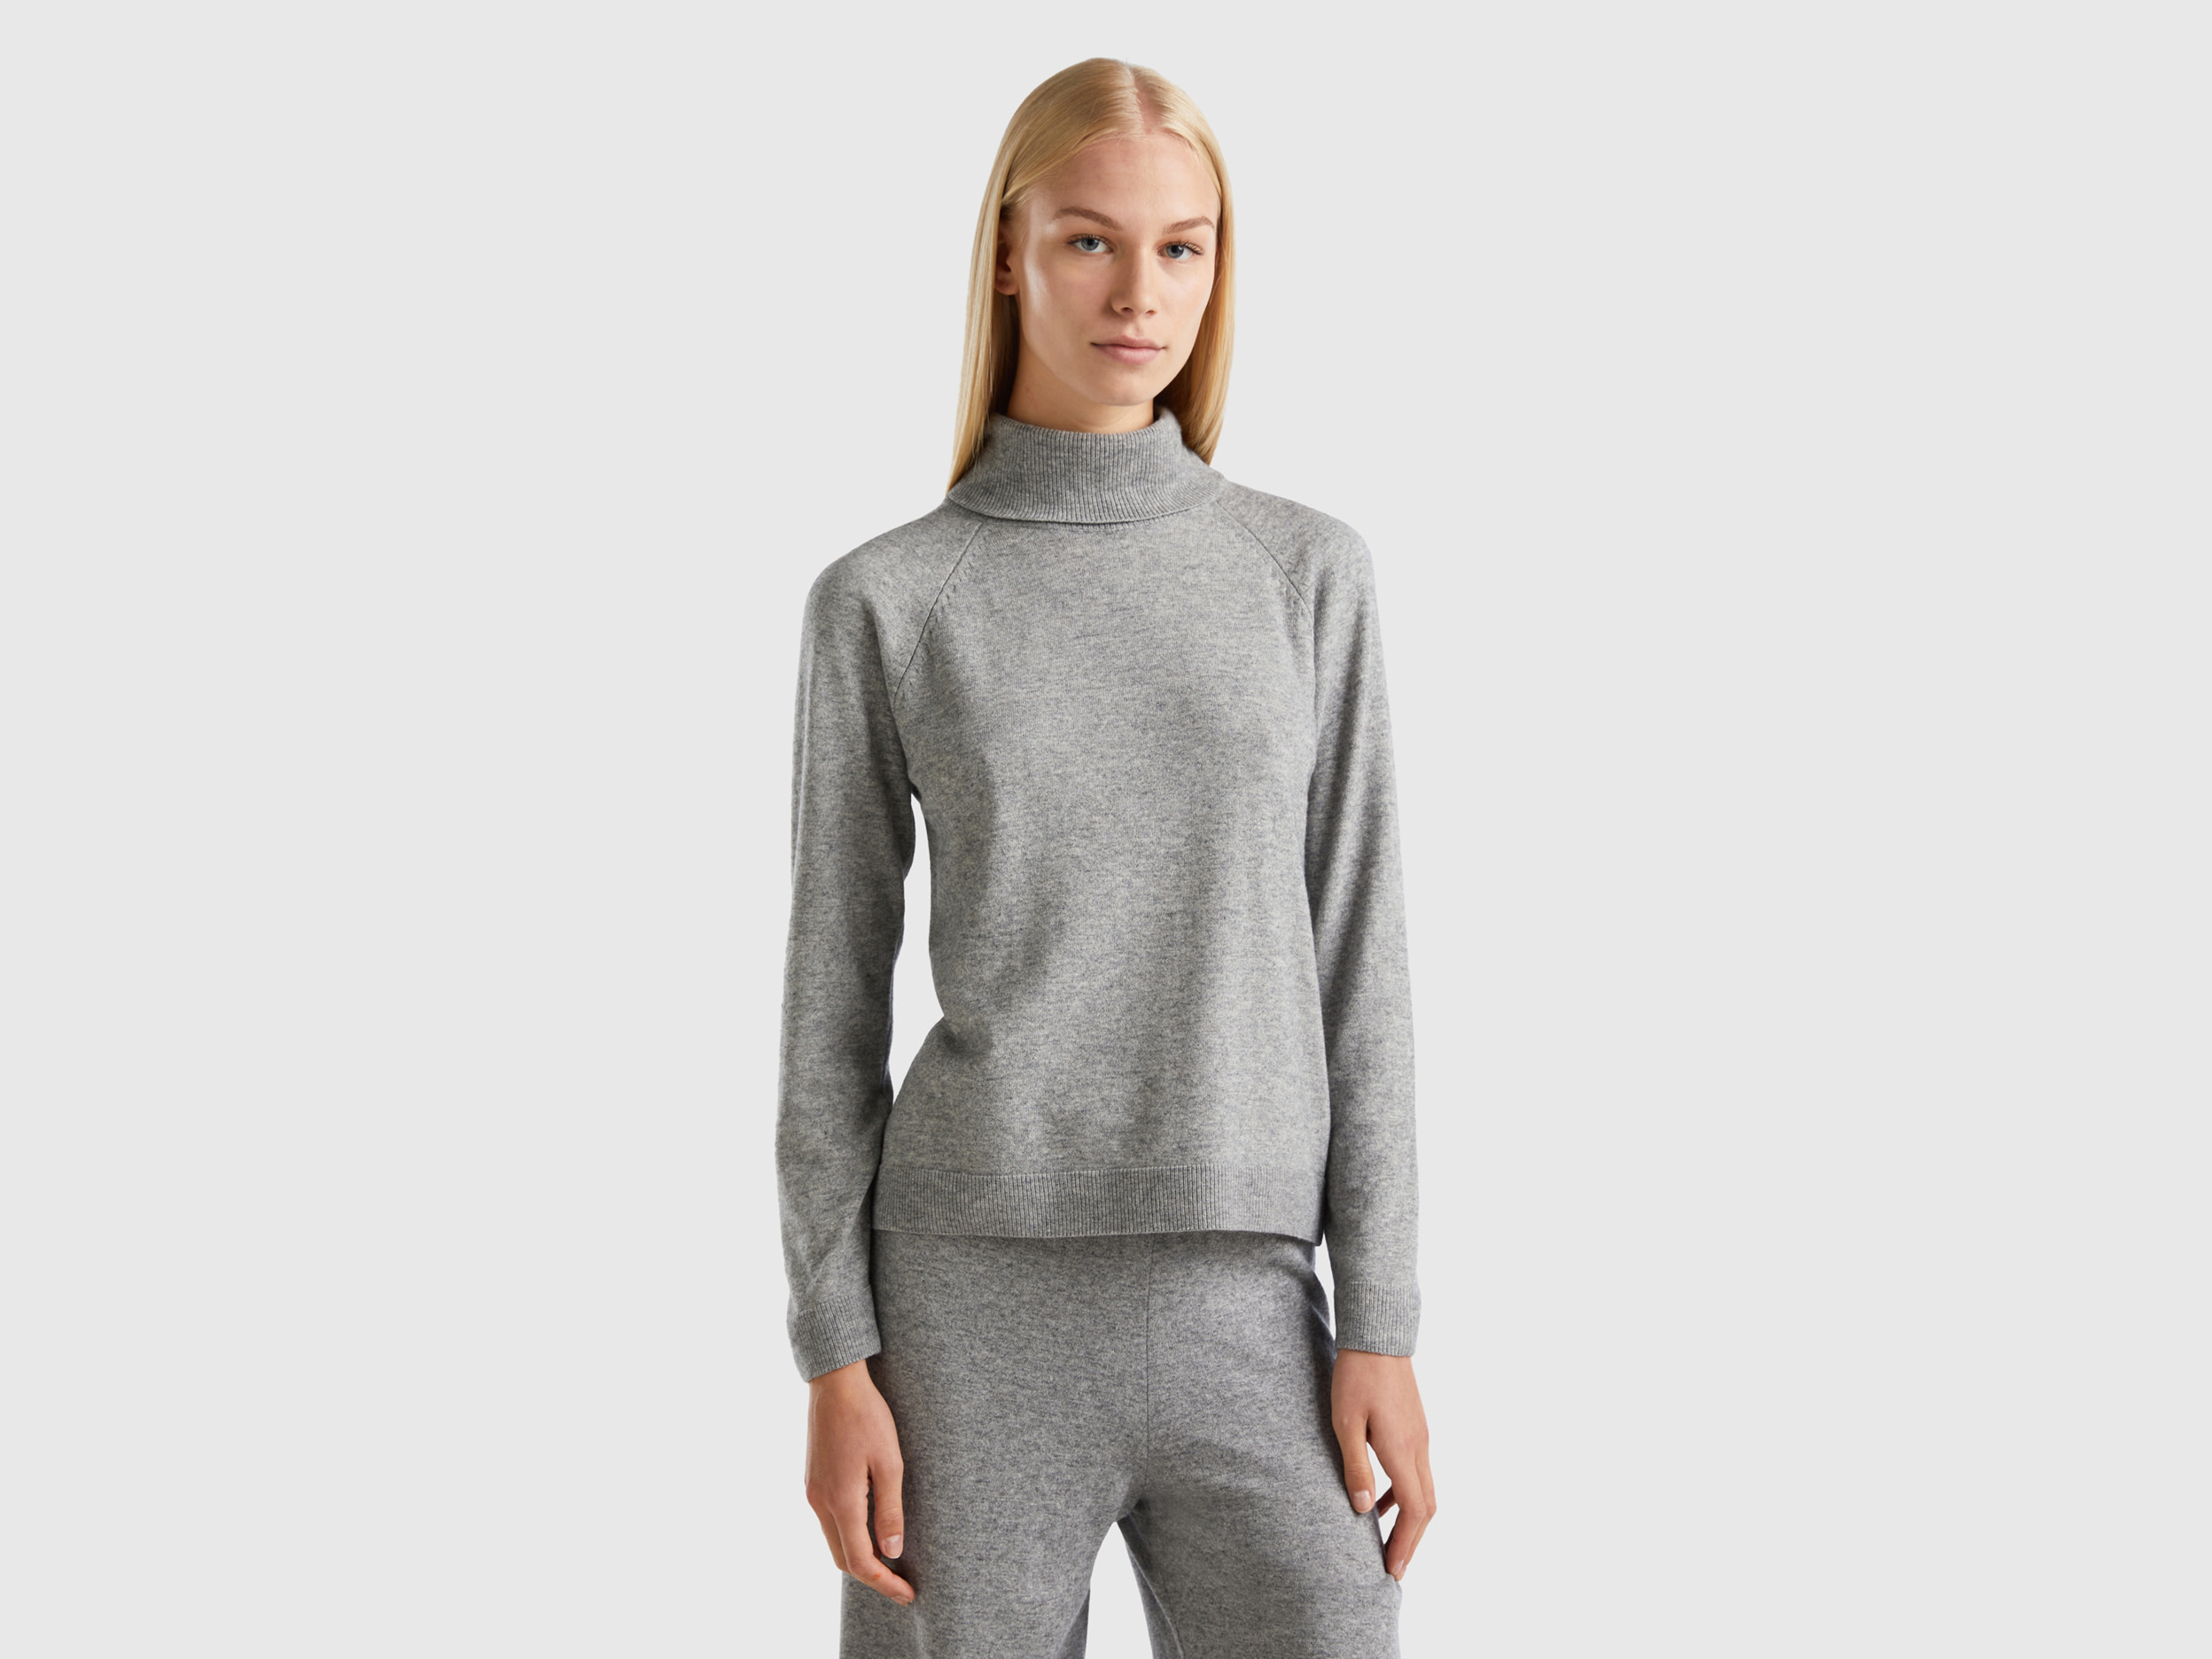 Benetton, Gray Turtleneck Sweater In Cashmere And Wool Blend, size M, Light Gray, Women